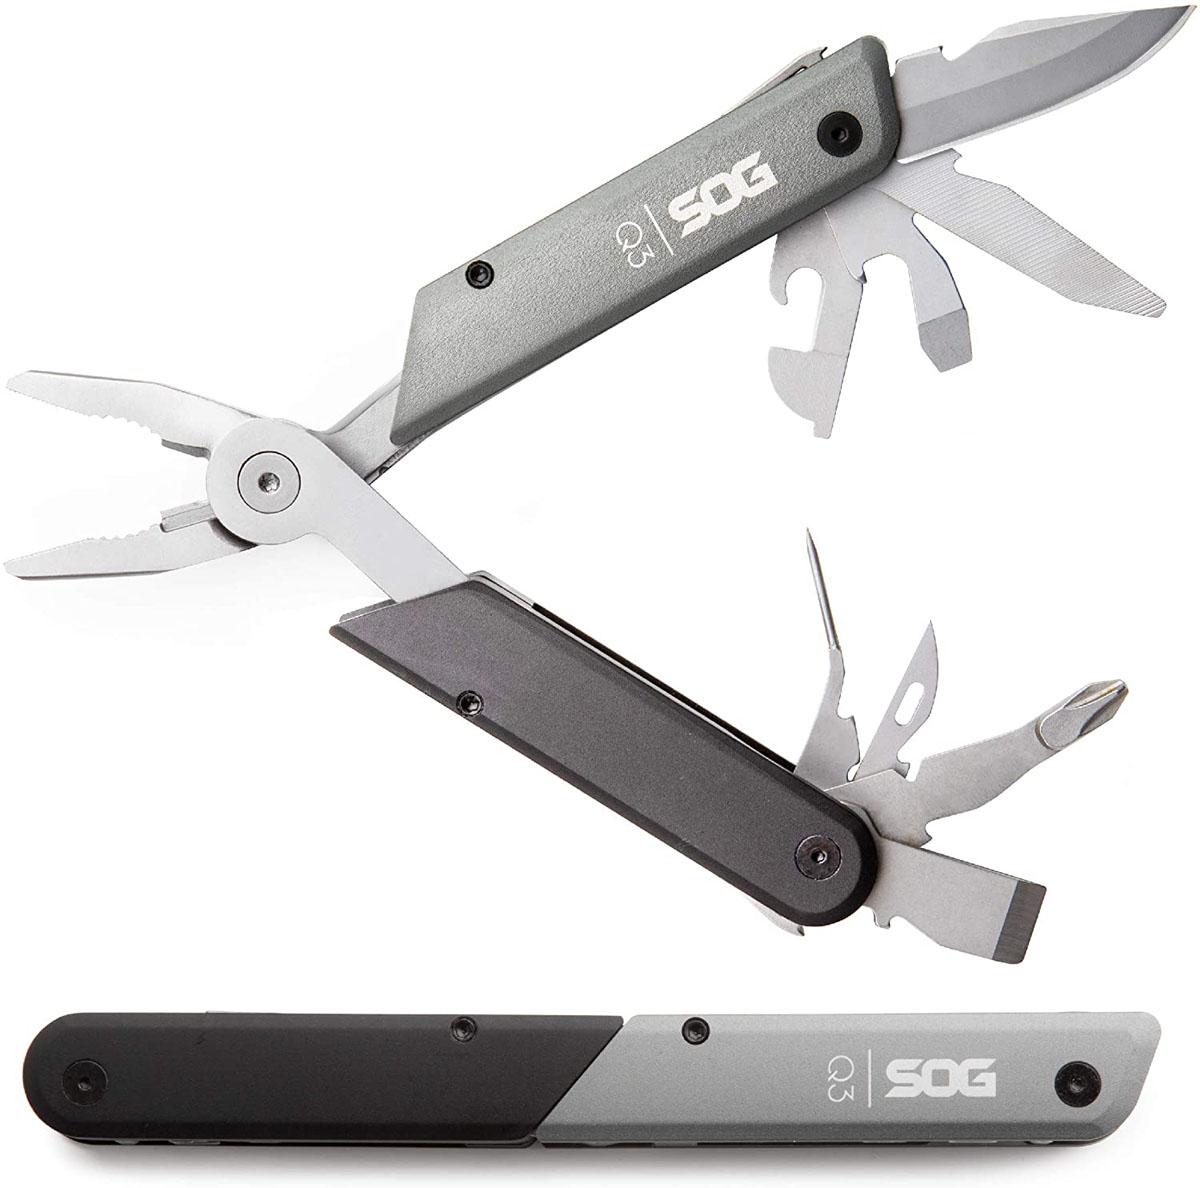 SOG Baton Q3 Multitool with Pliers for $39.99 Shipped